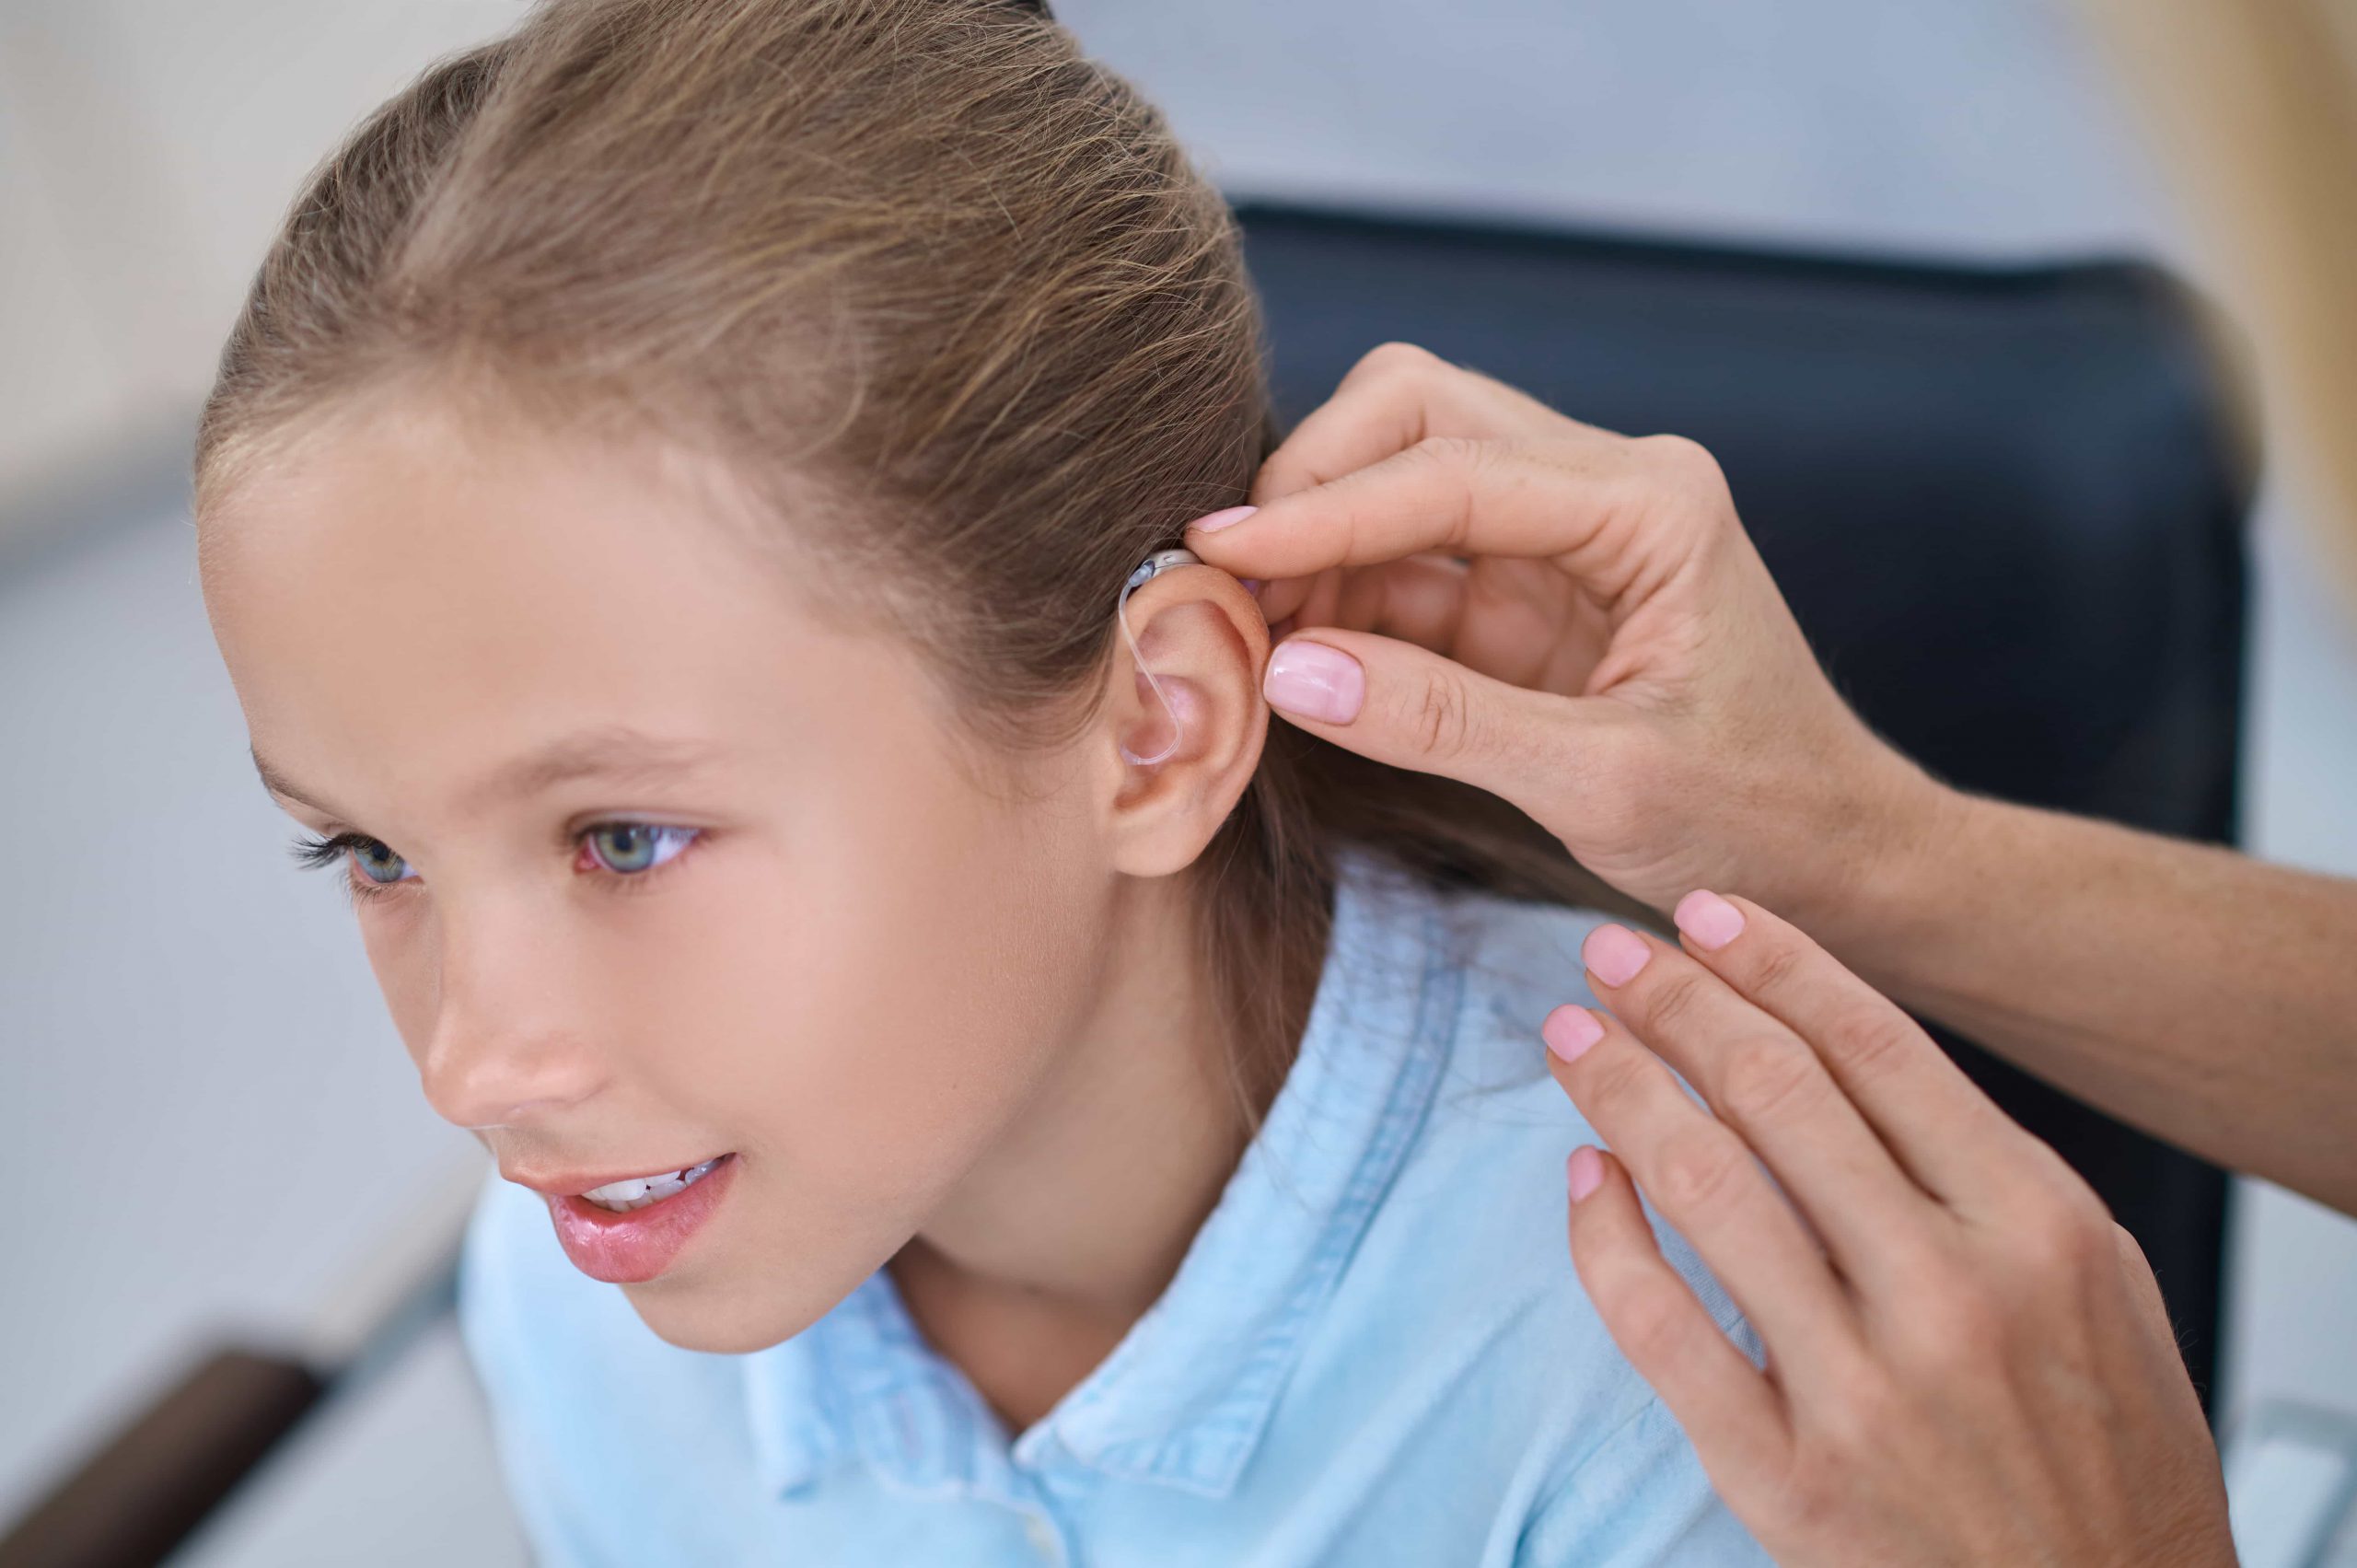 female-patient-having-hearing-device-attached-her-ear